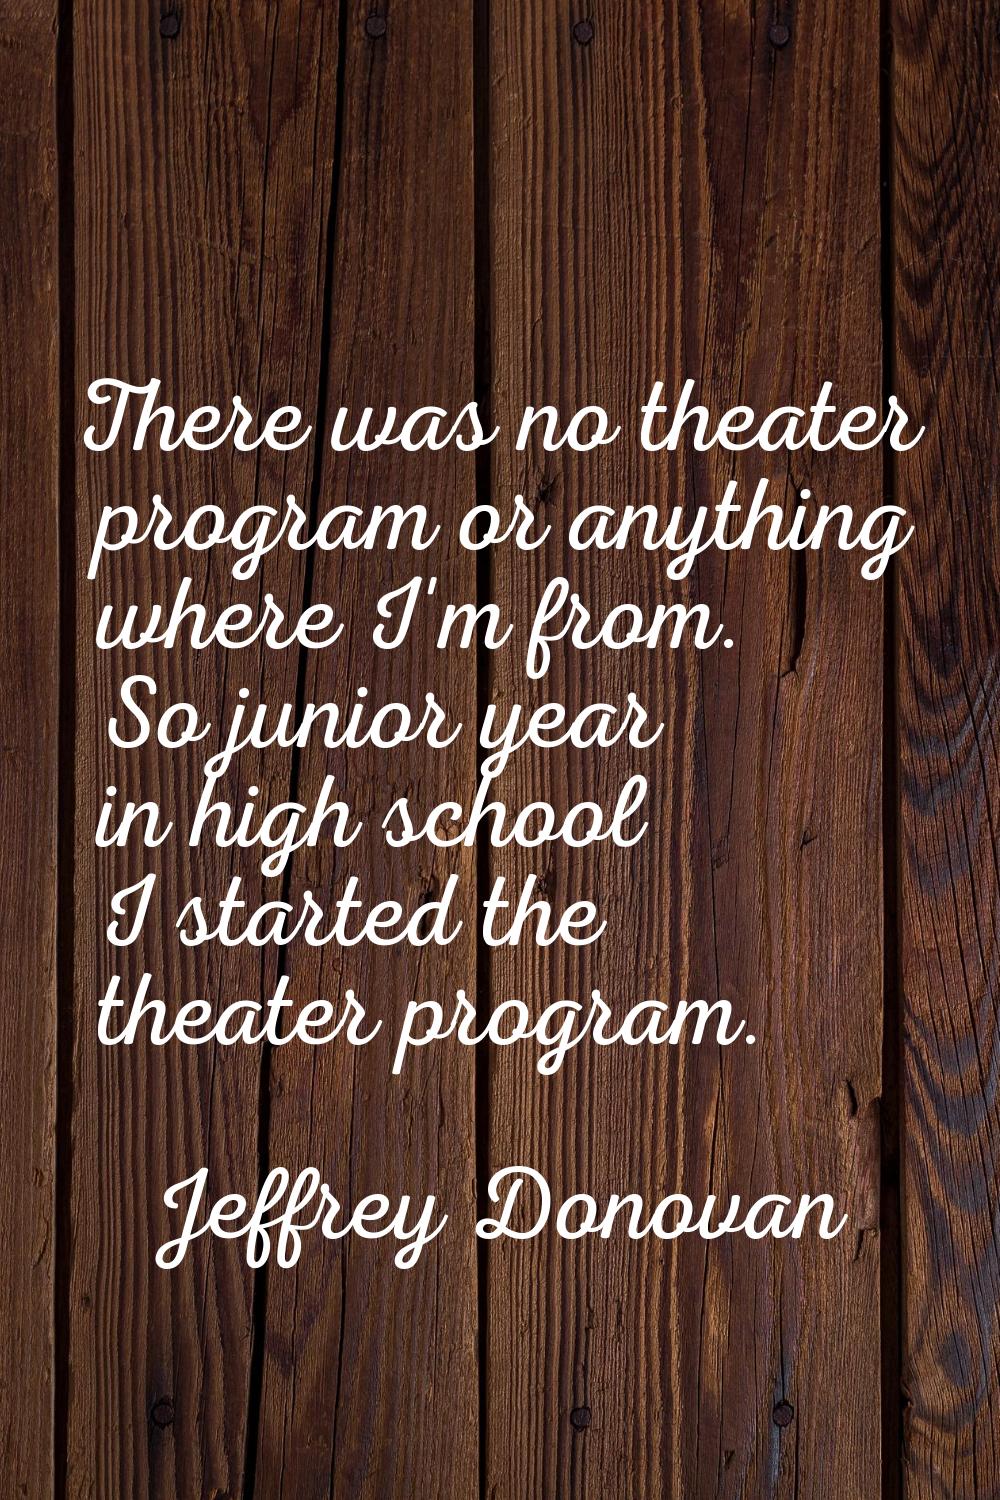 There was no theater program or anything where I'm from. So junior year in high school I started th